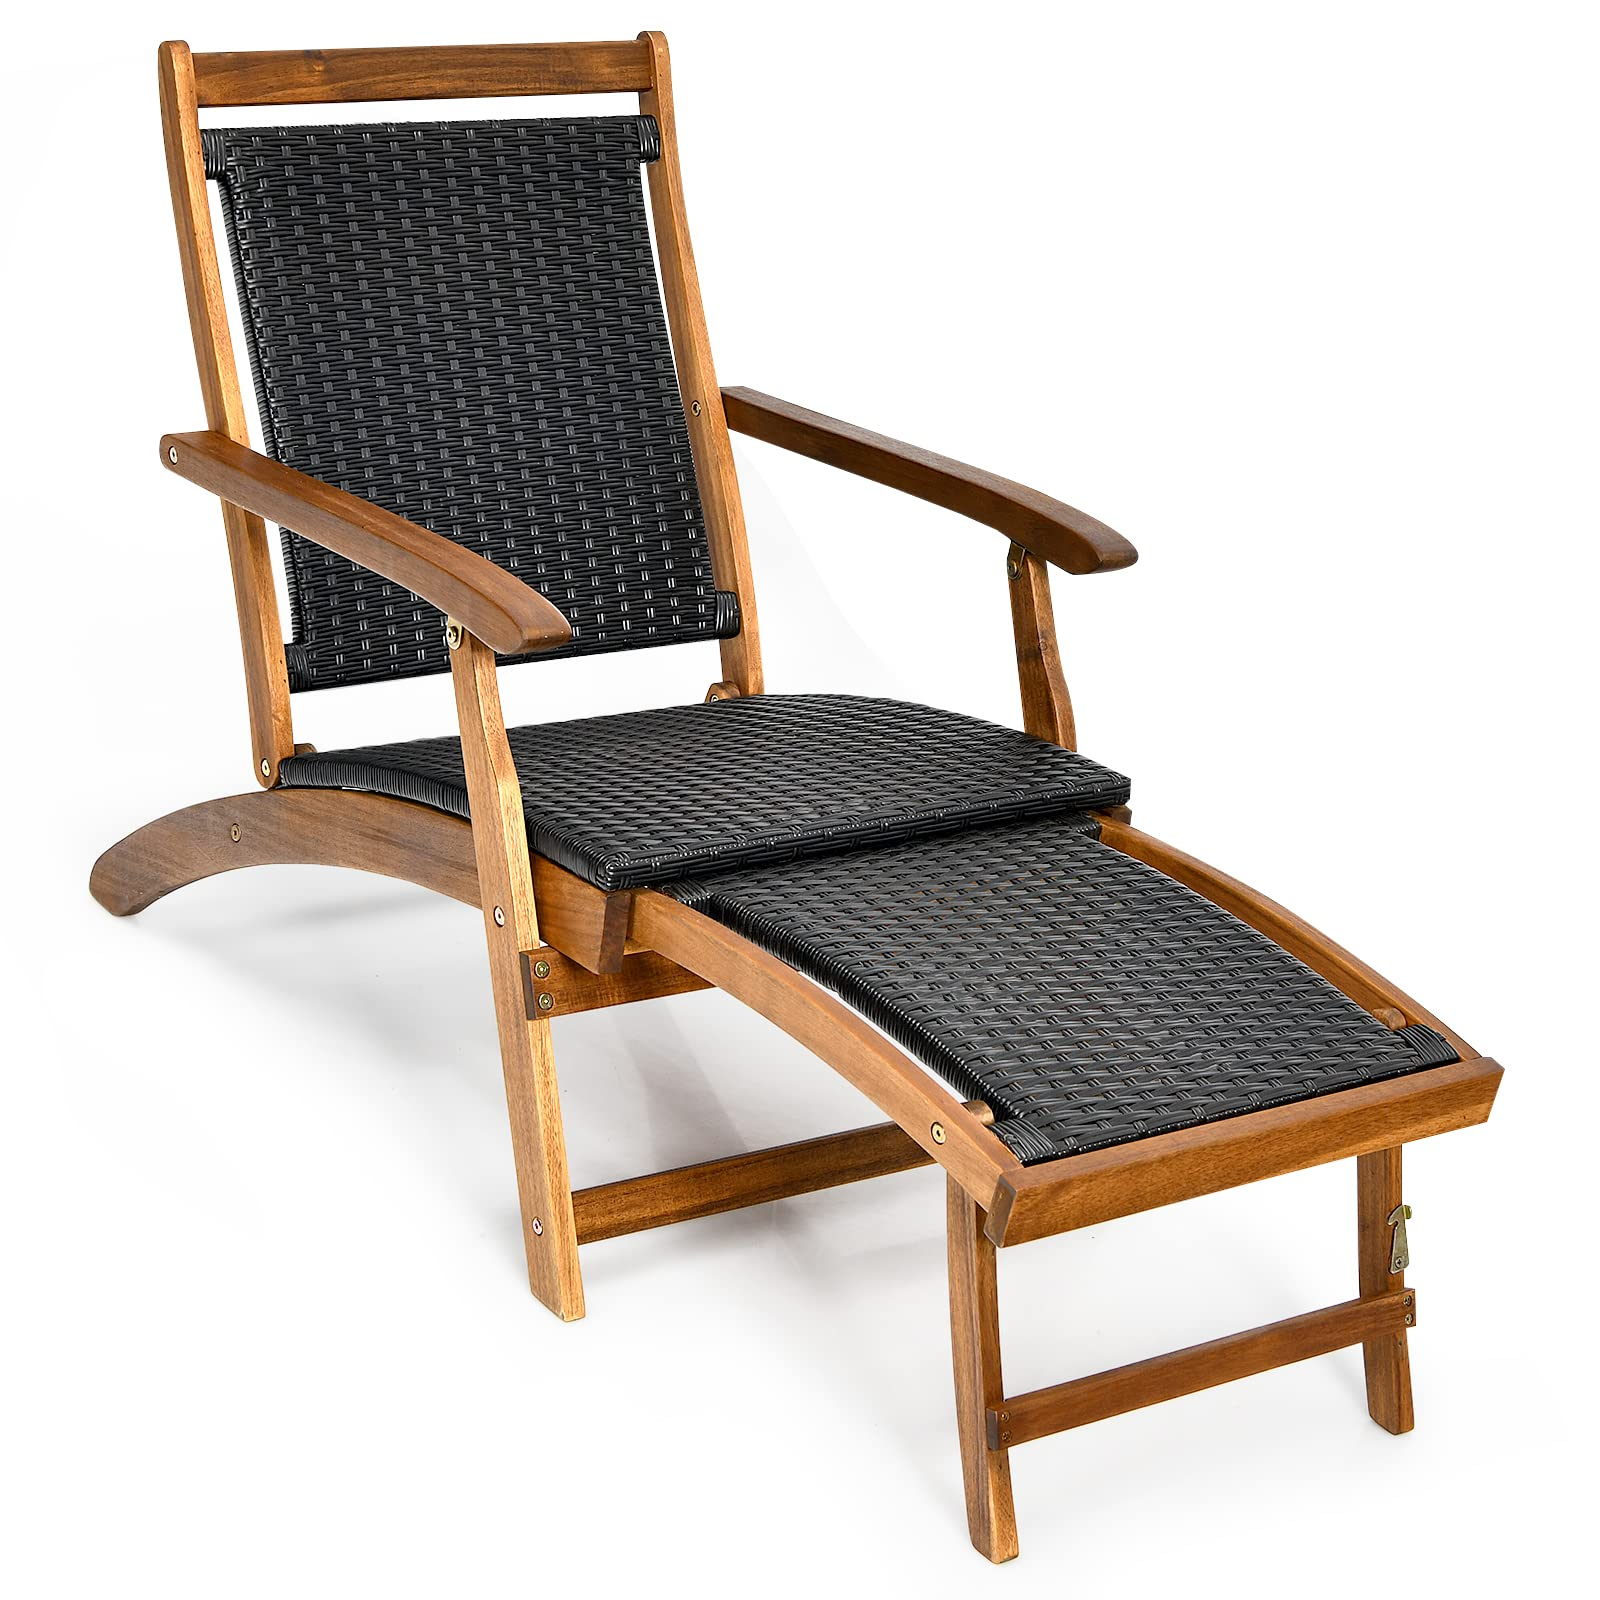 Tangkula Acacia Wood Folding Chaise Lounge Chair, Patiojoy Outdoor Foldable Deck Chair